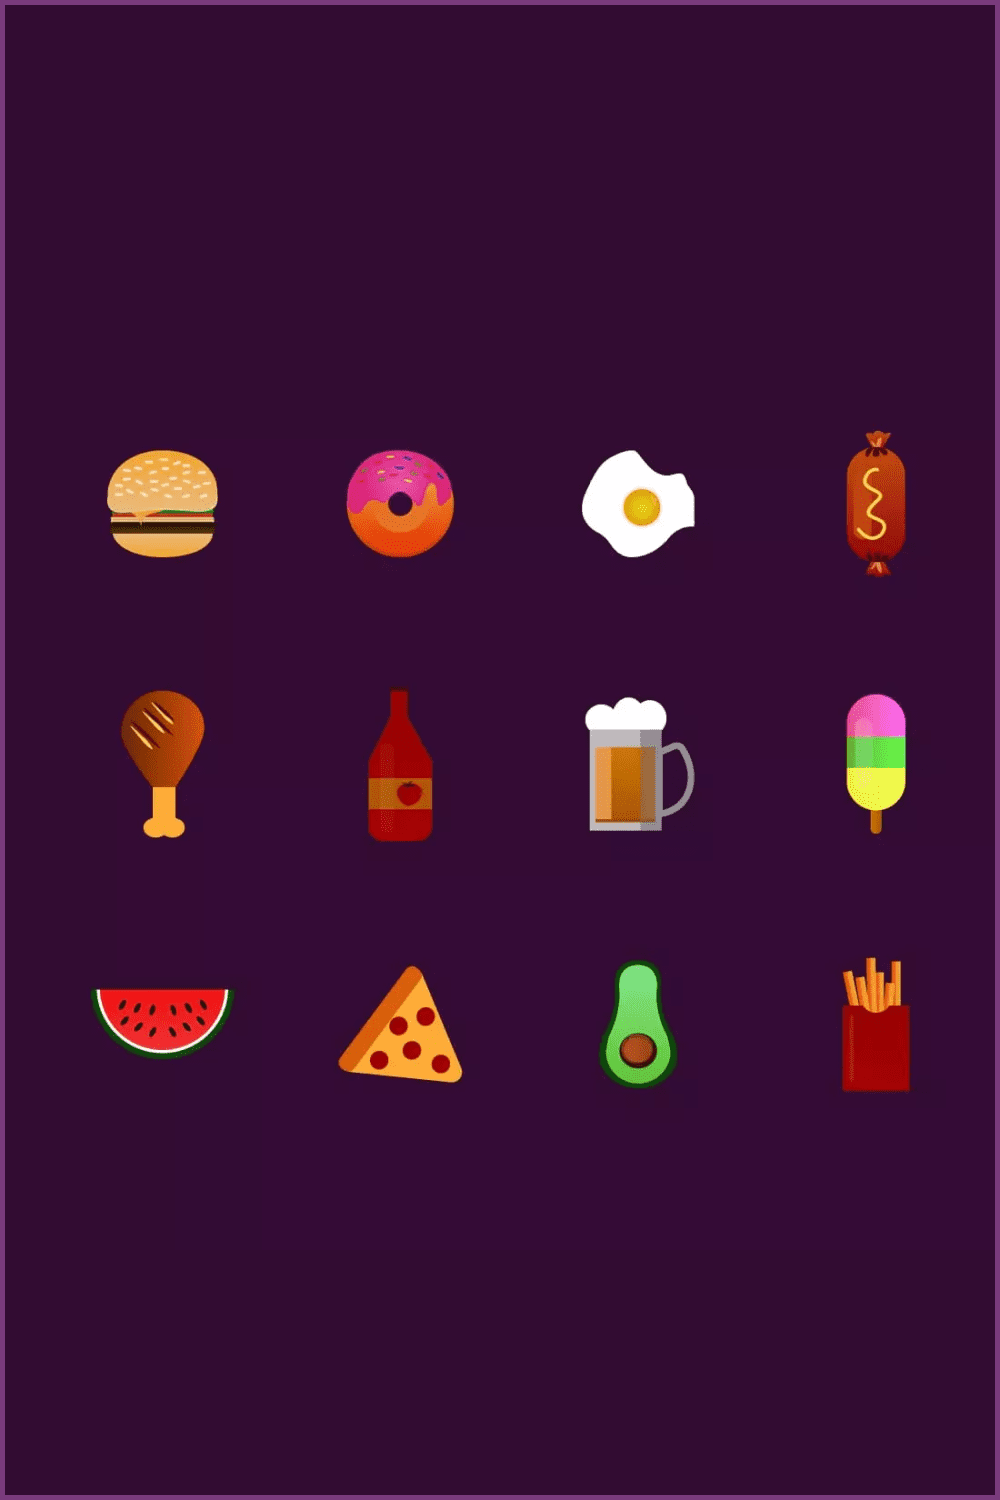 Collage of icons of hamburgers, pizza, watermelon, sausages, potatoes, beer.